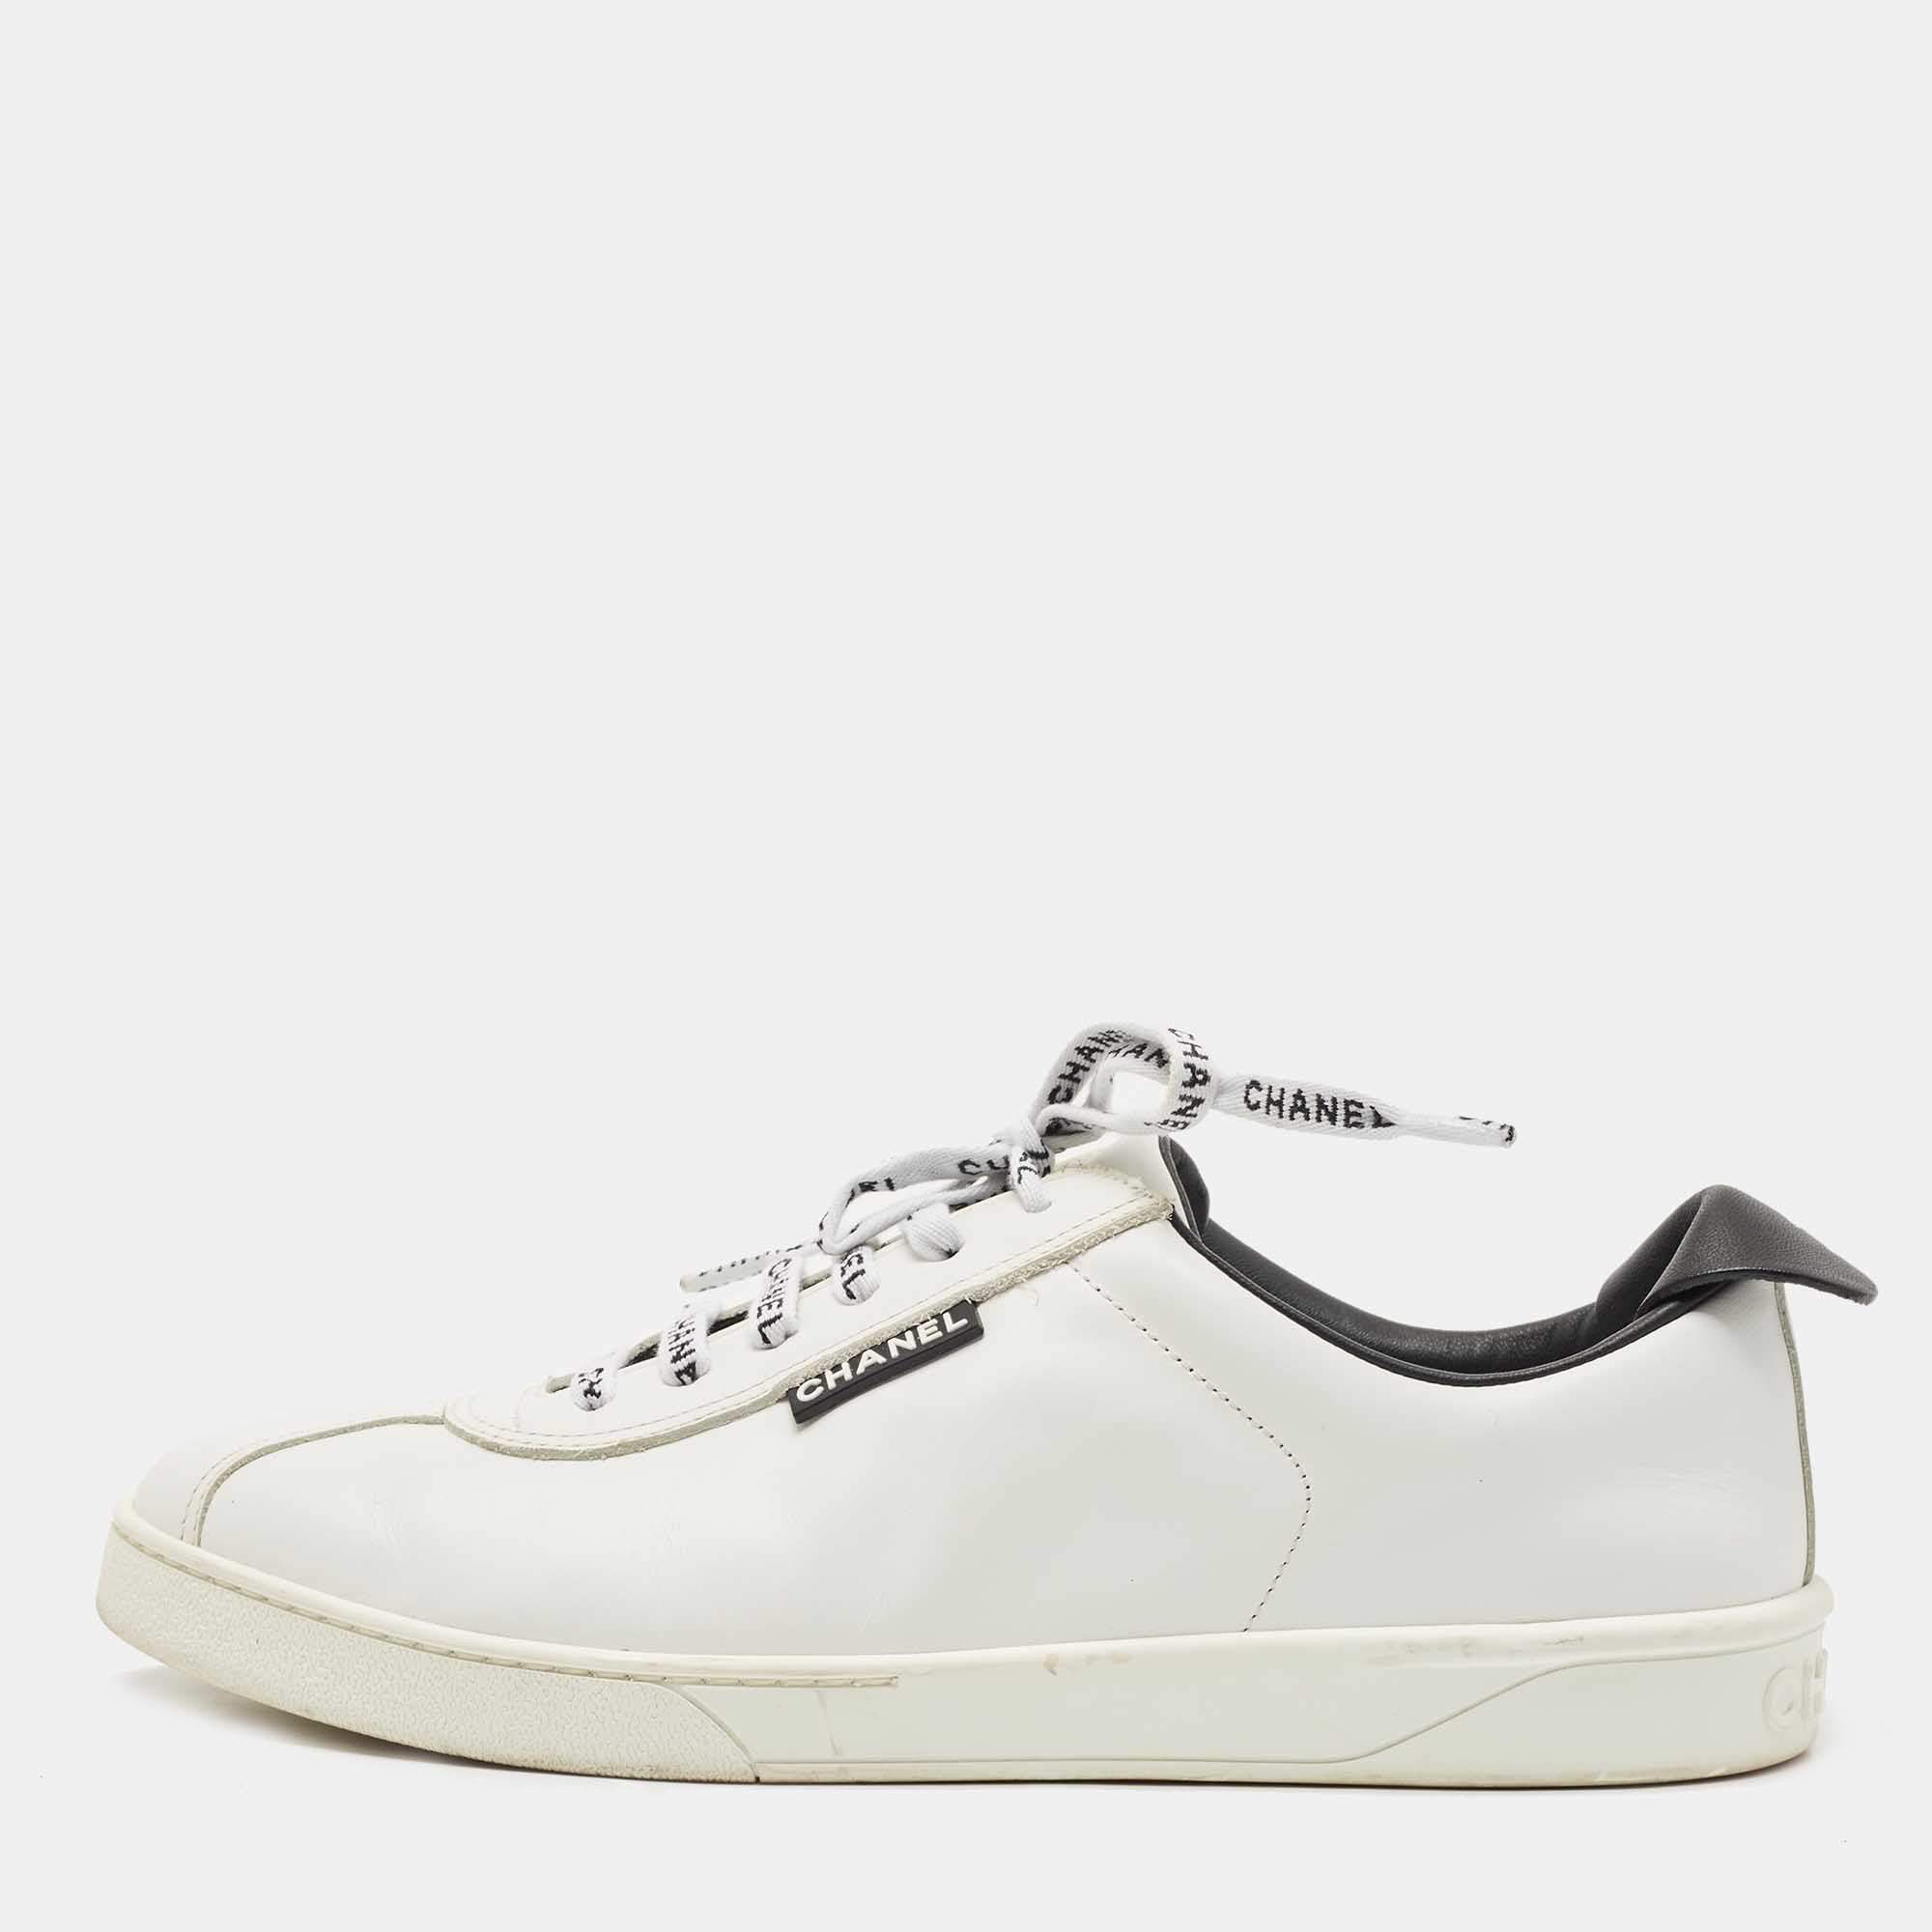 Chanel White Leather Sneakers with CC Logo. Insole length: approx